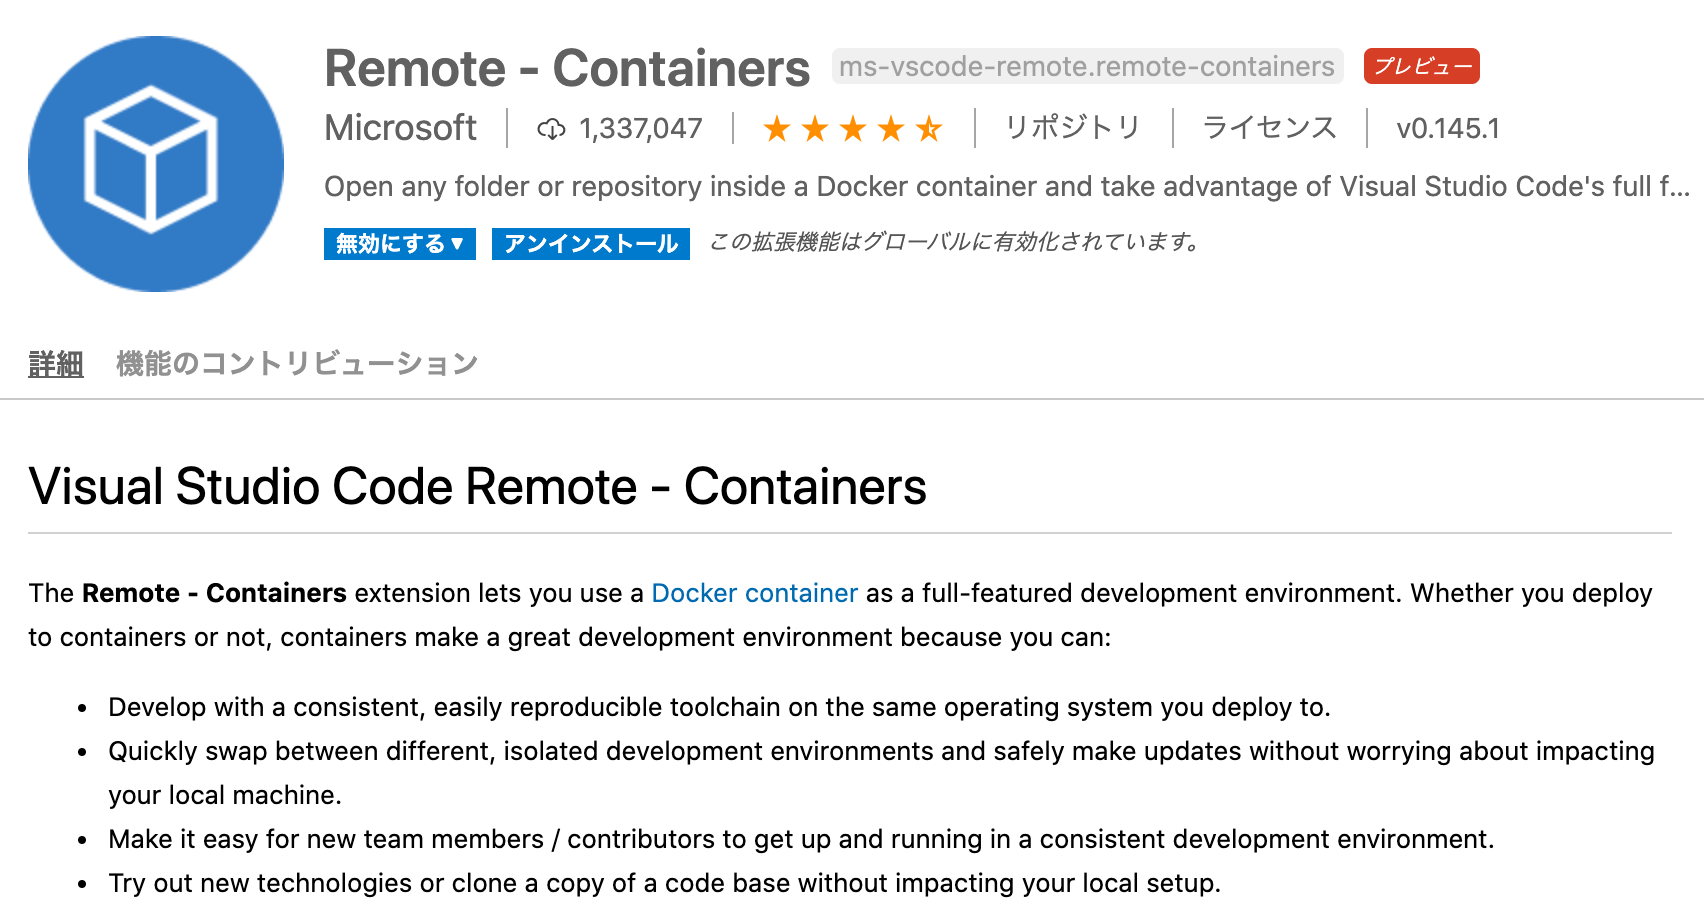 Remote-Containers